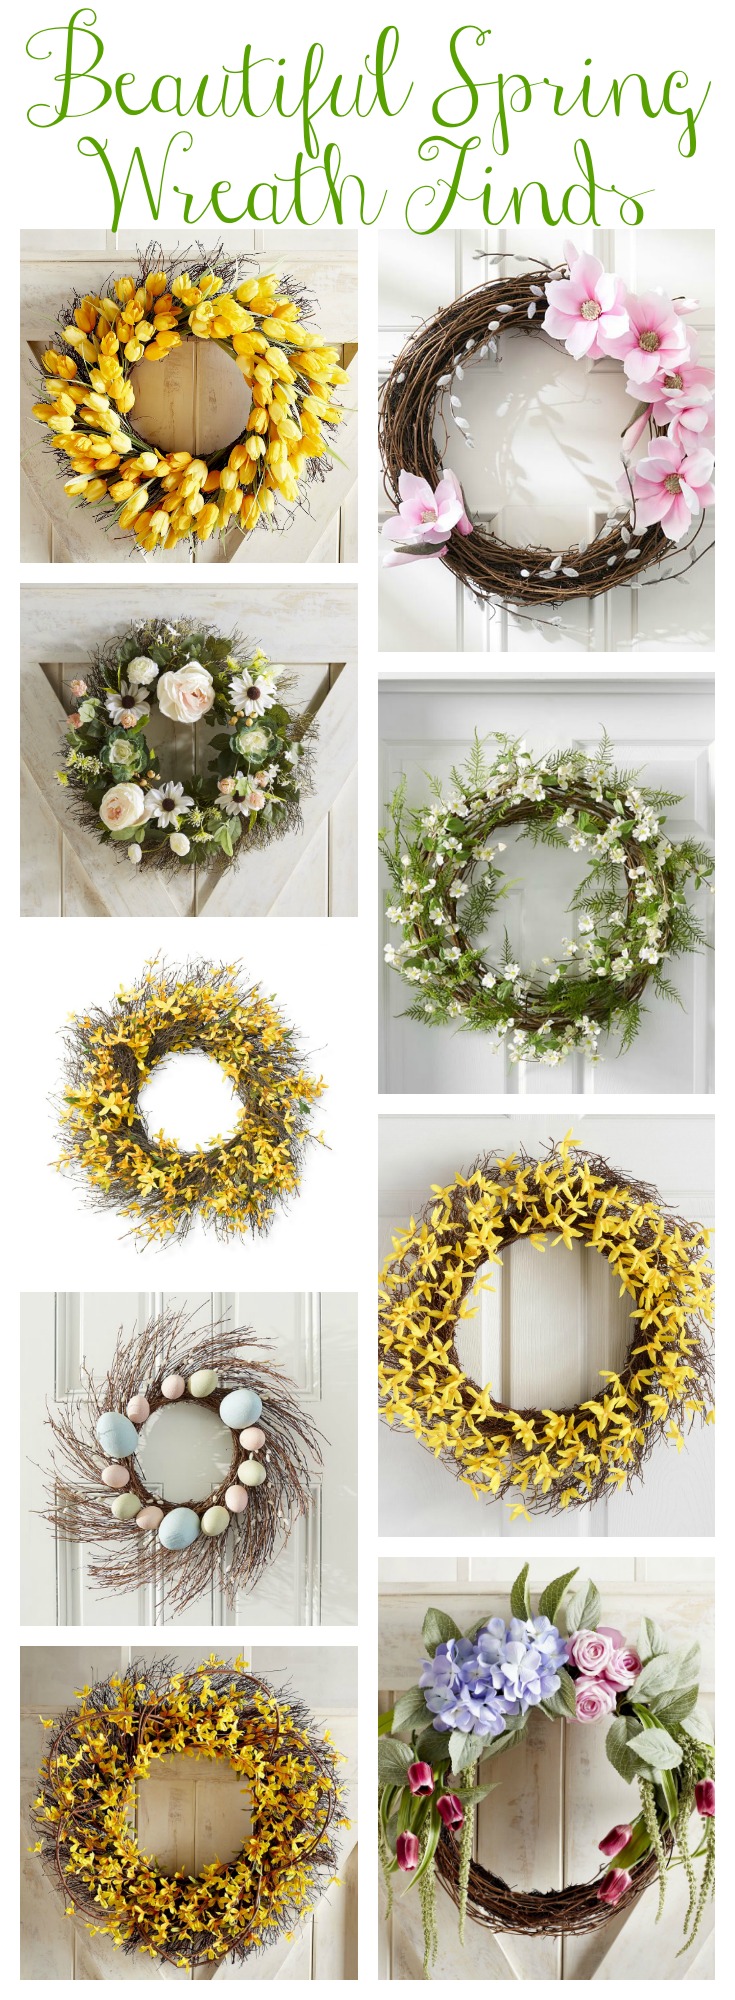 Beautiful Spring Wreath Finds poster.